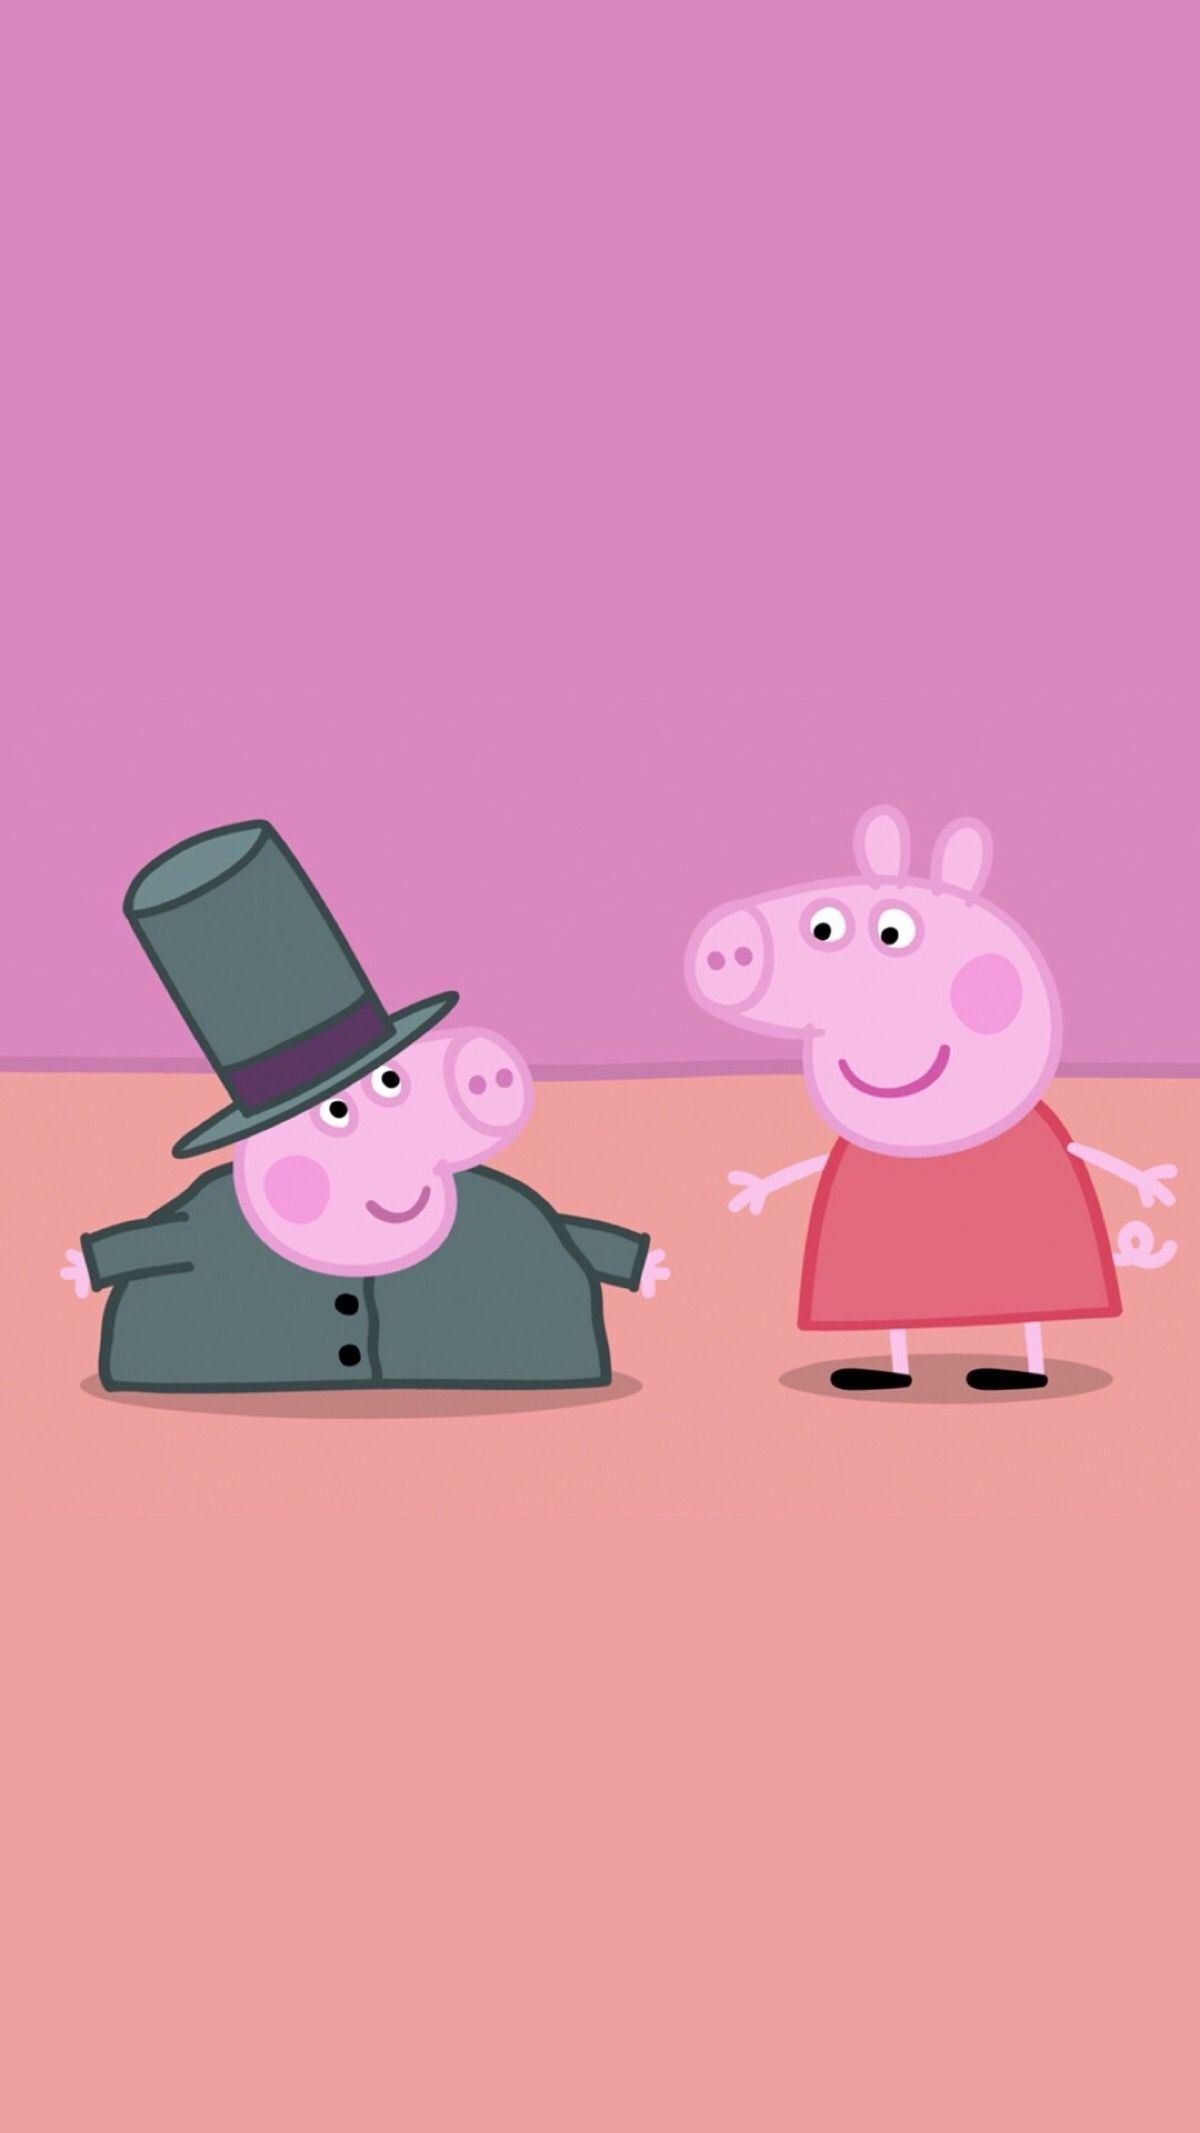 Peppa Pig Wallpaper What Are You Doing On My Phone. Peppa pig wallpaper, Pig wallpaper, Cute cartoon wallpaper